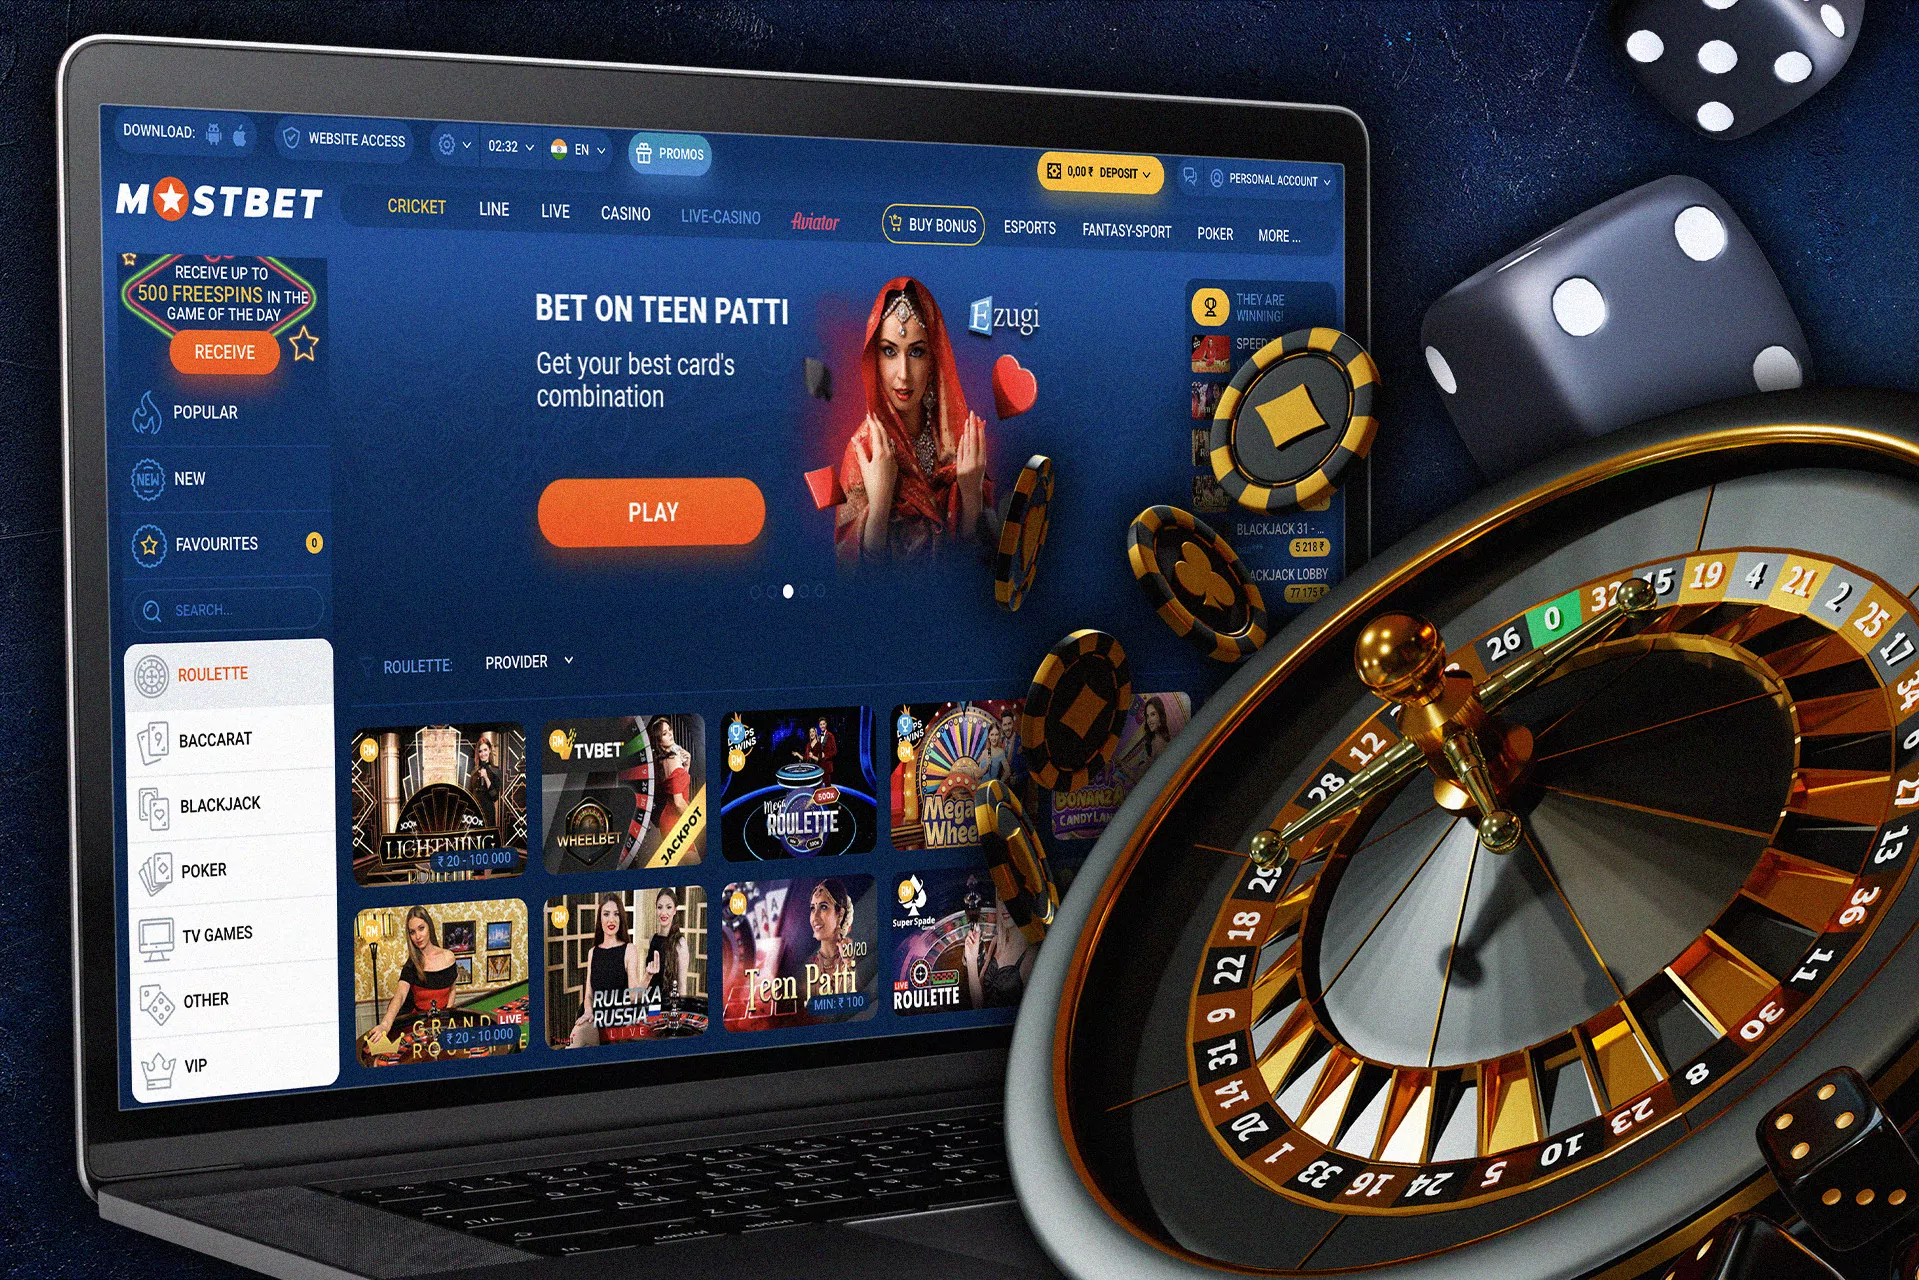 There is also a european roulette in the Mostbet casino.